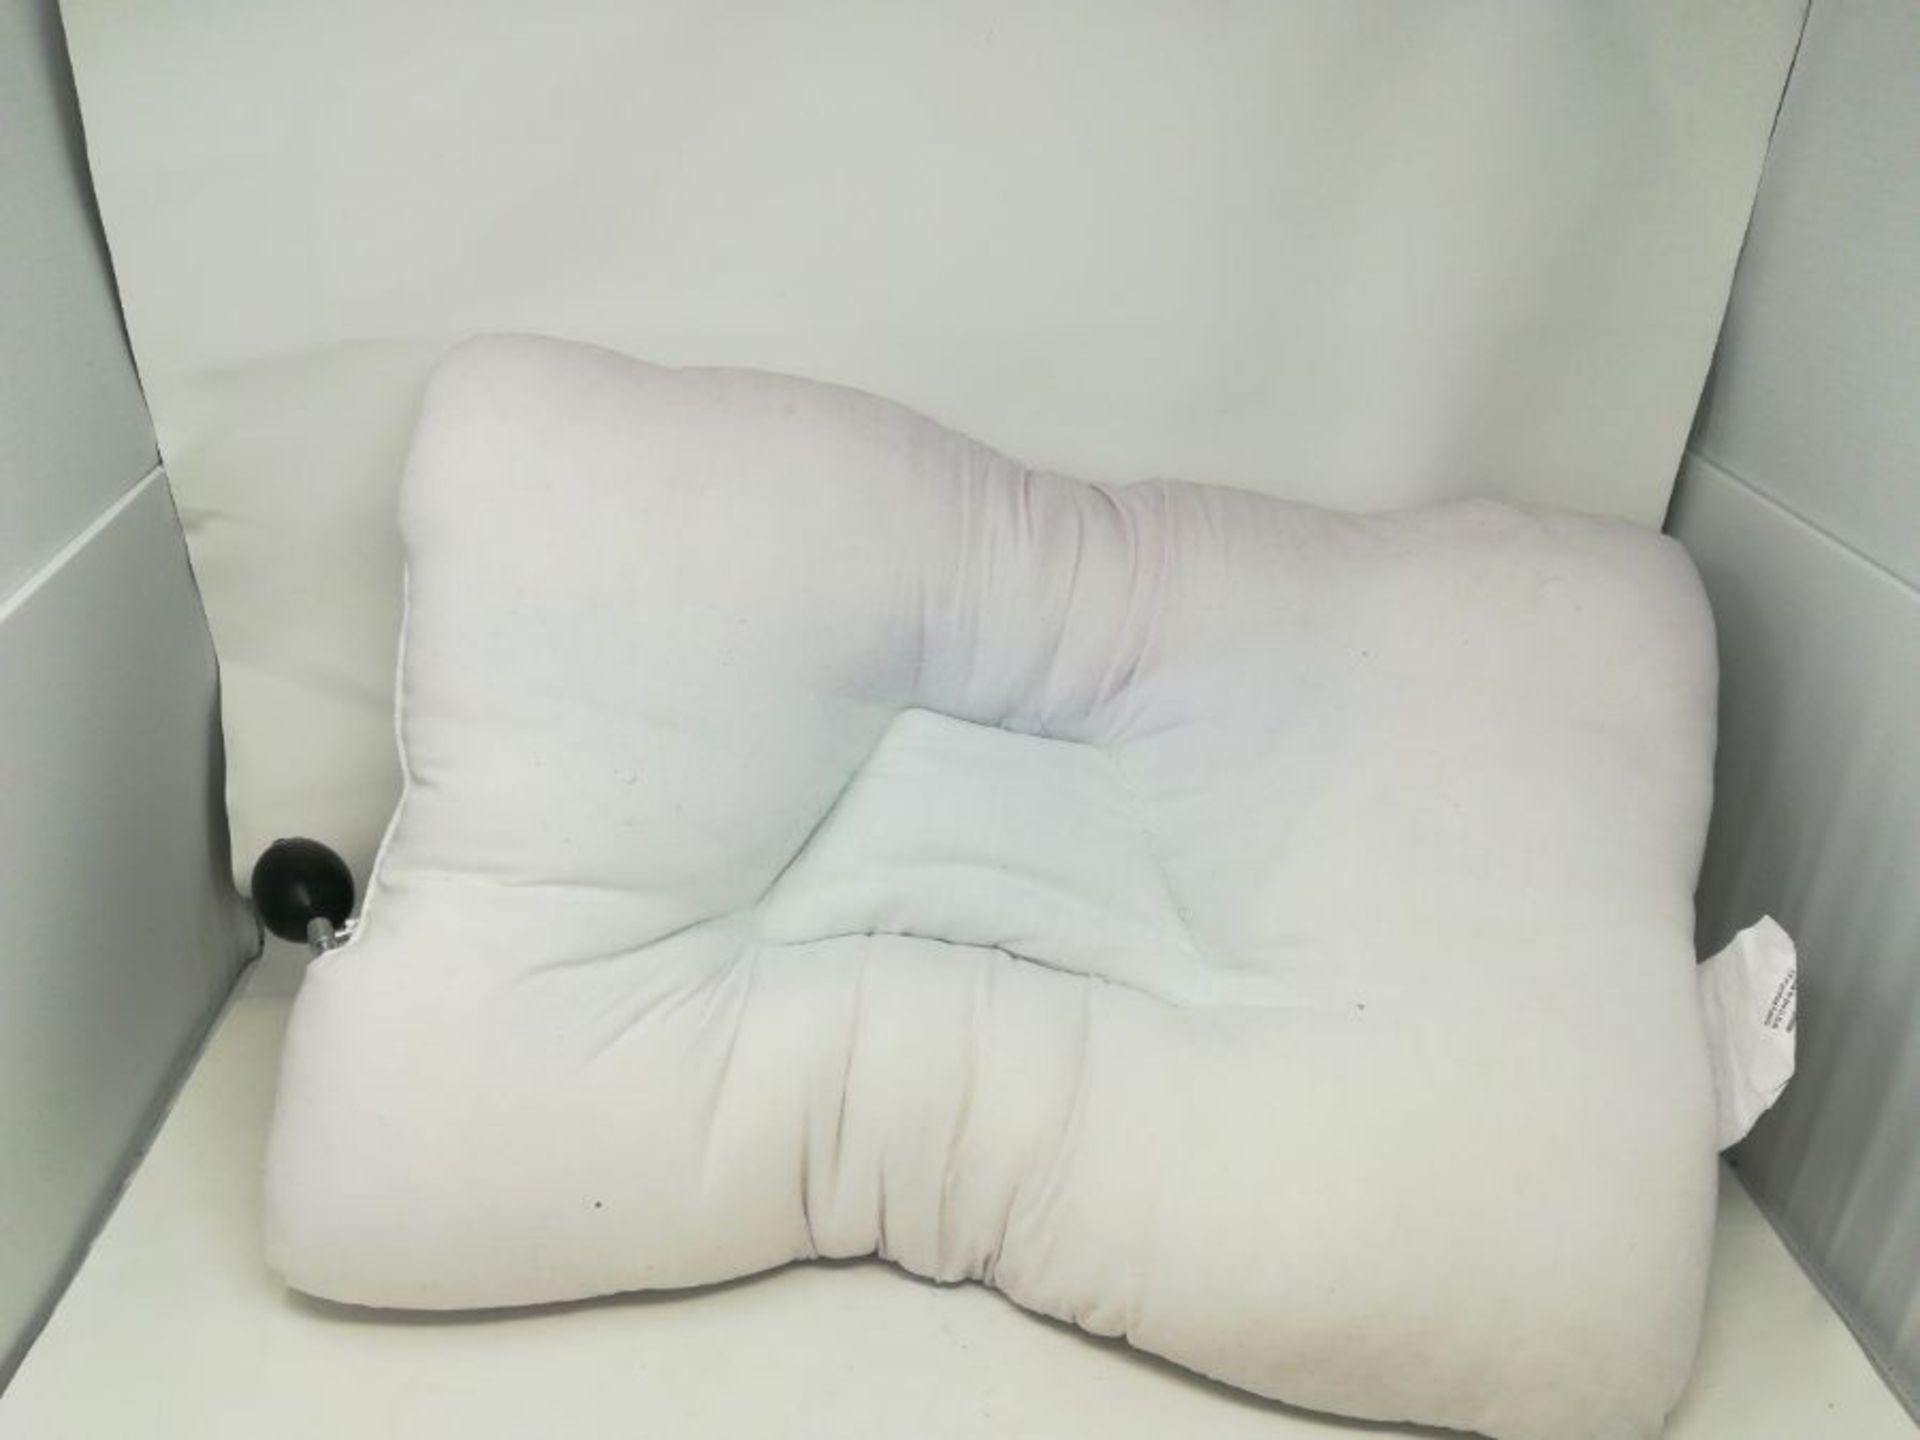 Performance Health Air-Core Adjustable Pillow - 61 x 41 cm - Image 2 of 2